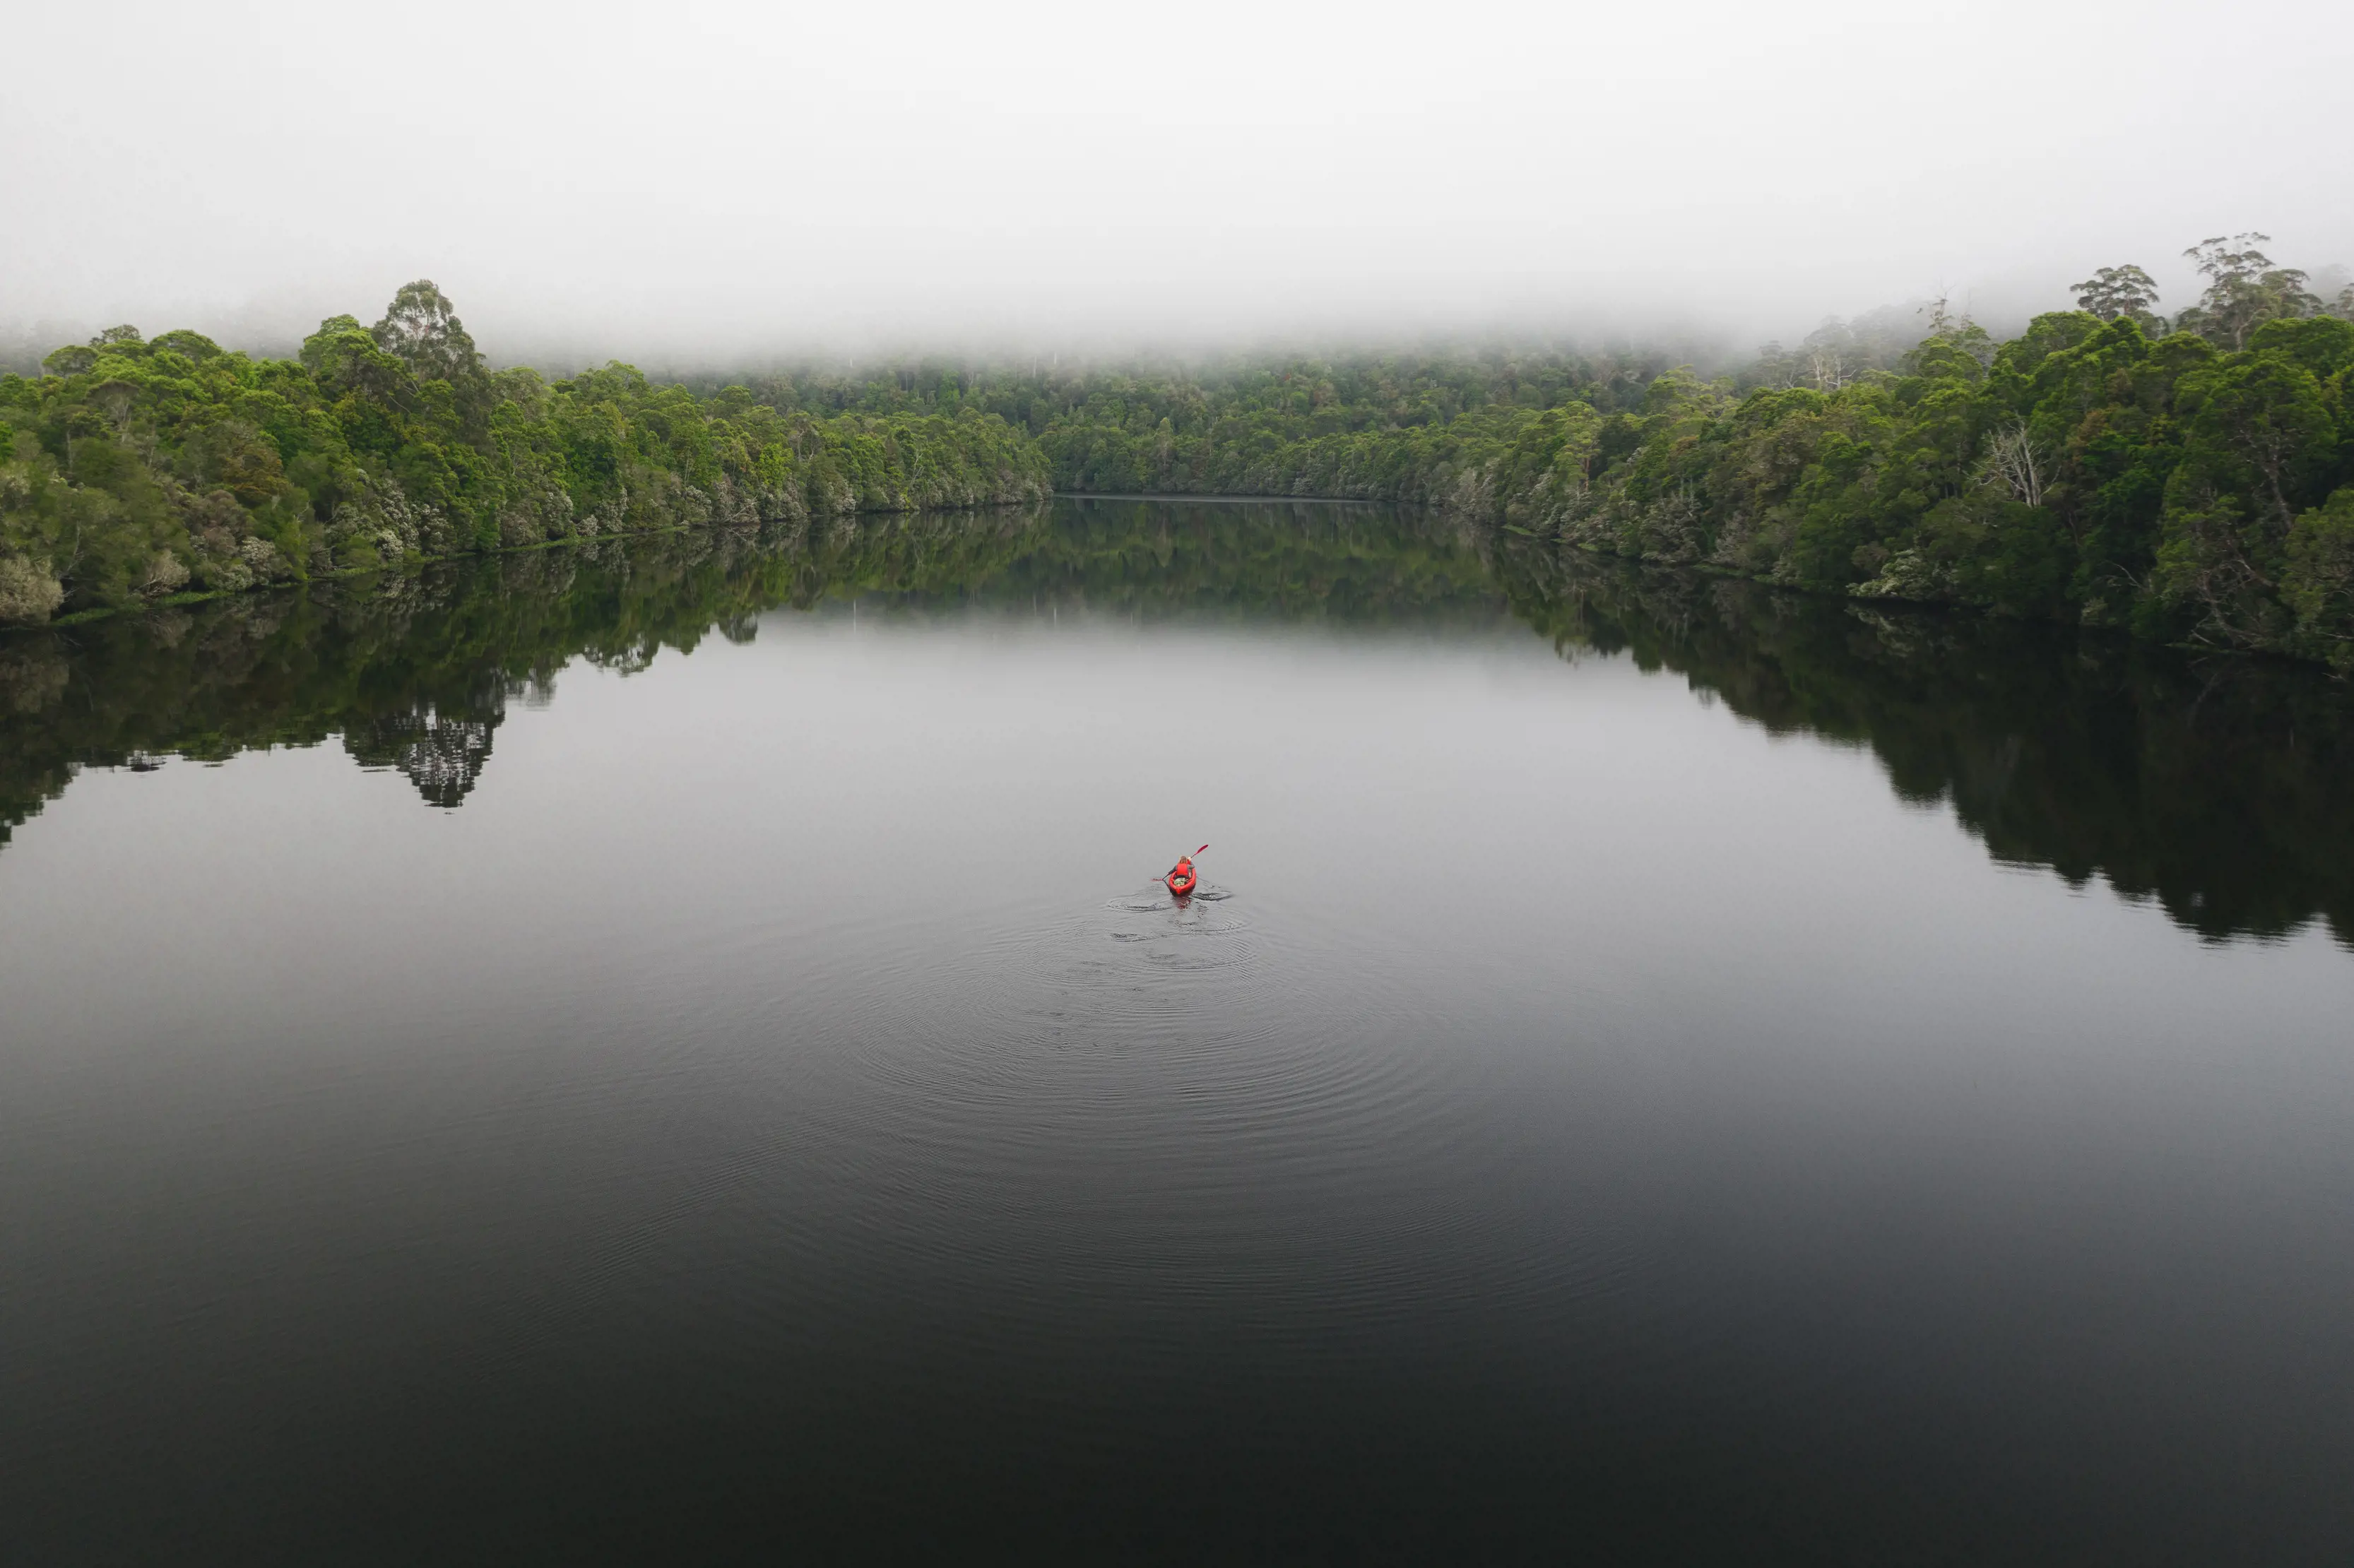 A contrasting, dramatic image taken from above of a person kayaking in the centre on the Pieman River, surrounded by dense rainforest.